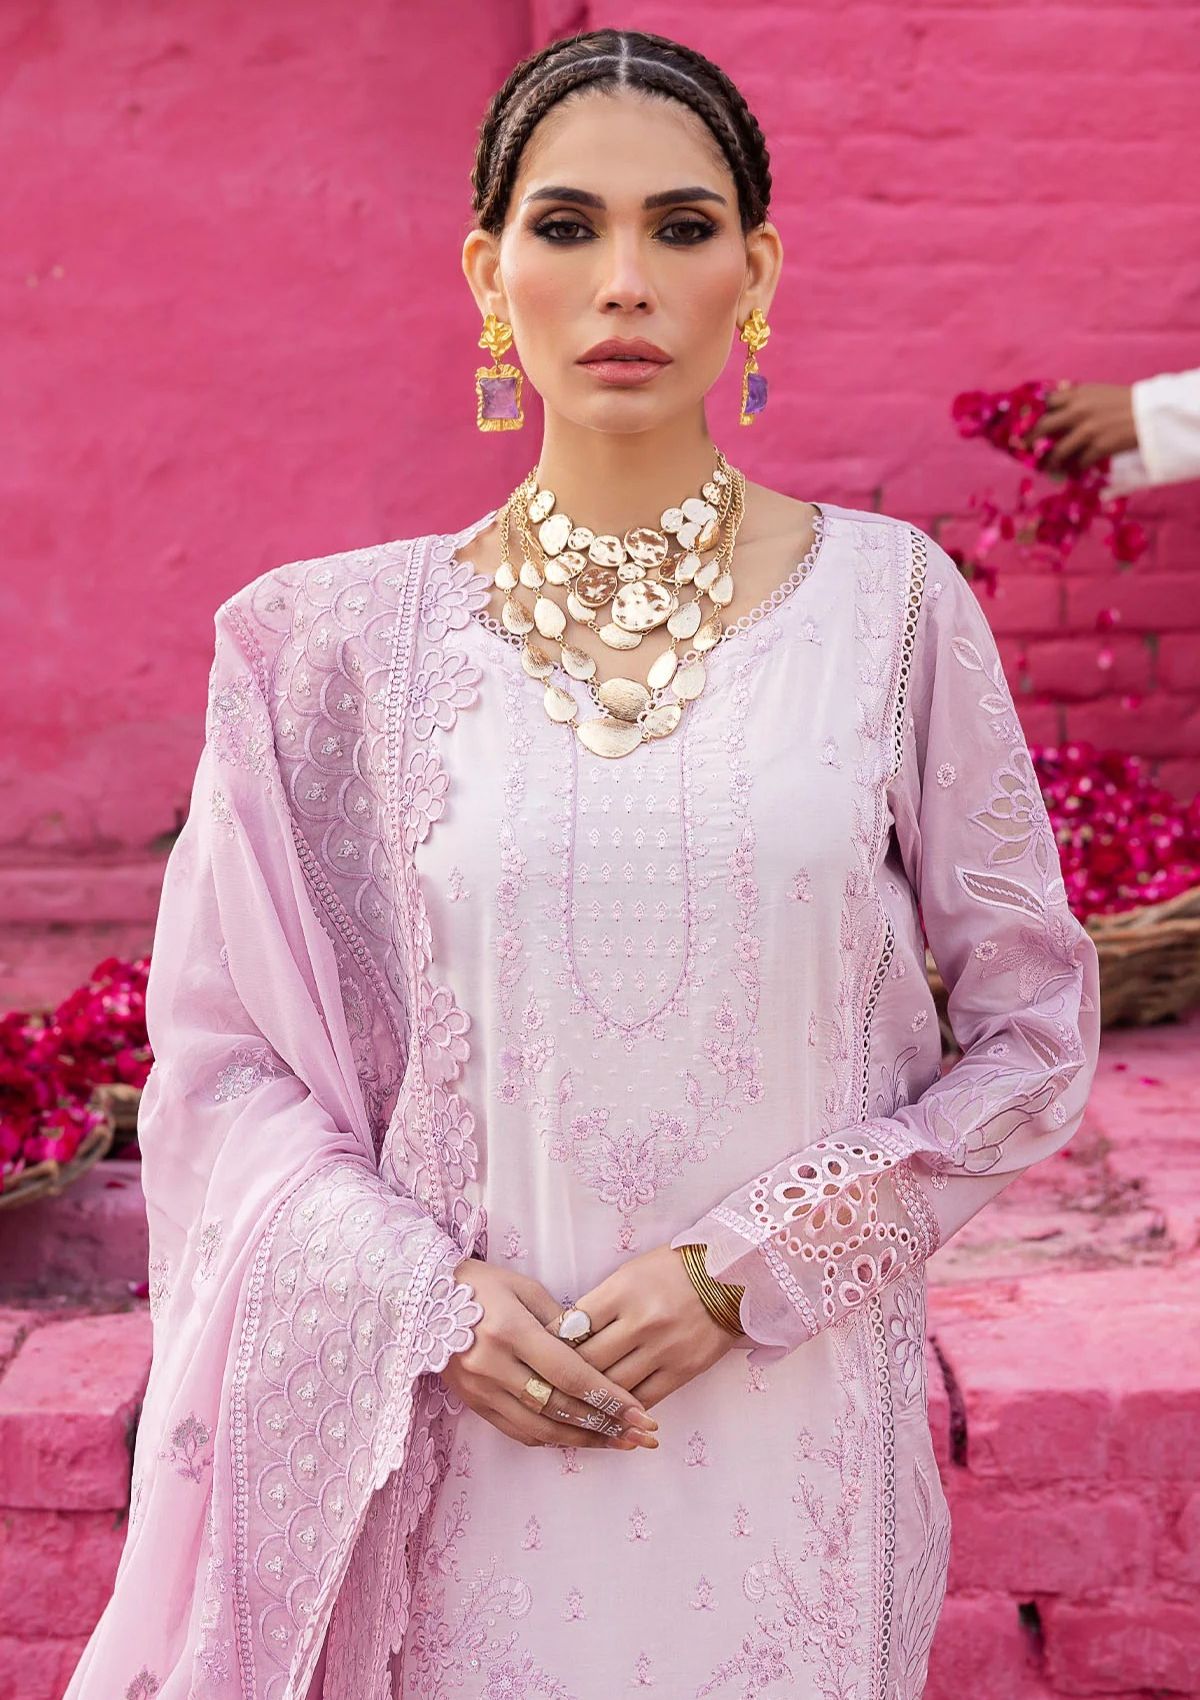 Lawn Collection - Nureh - Mela - NDS - 106